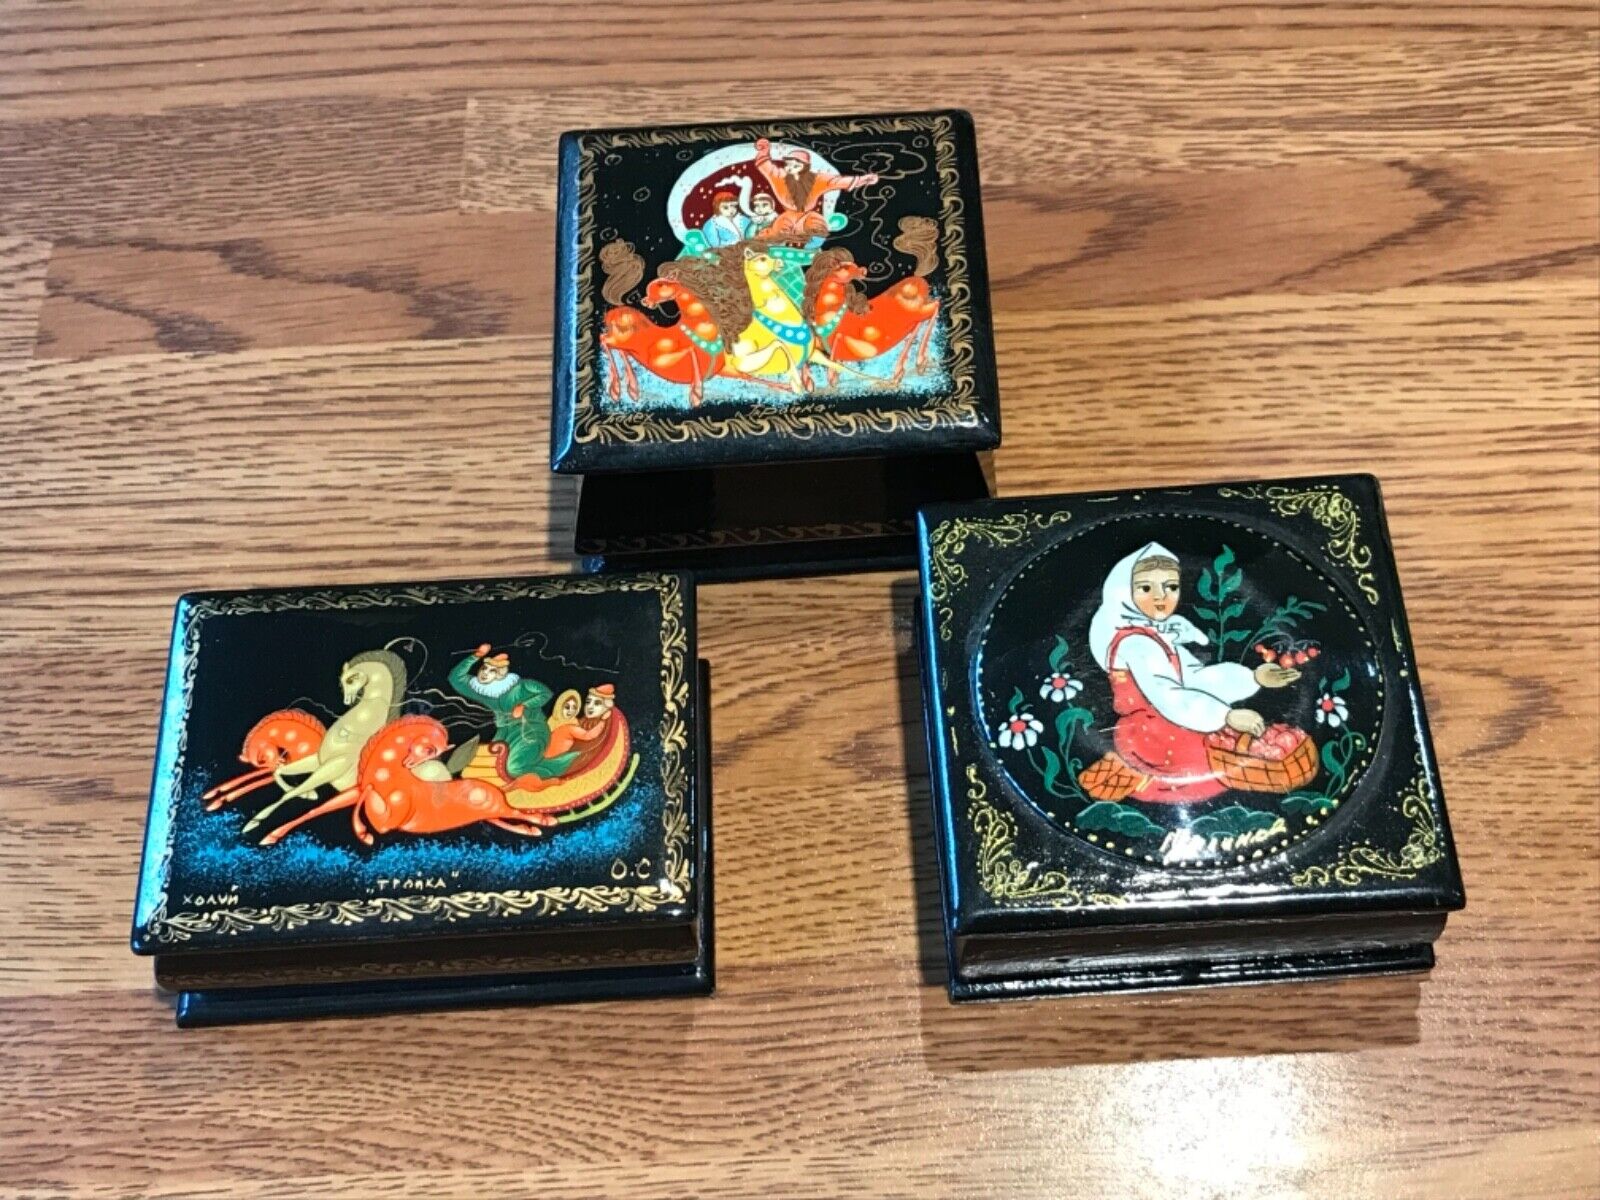 🔥 1980s SOVIET ERA LOT OF 3 PALEKH RUSSIAN LACQUER BOXES HAND PAINTED FAIRYTALE